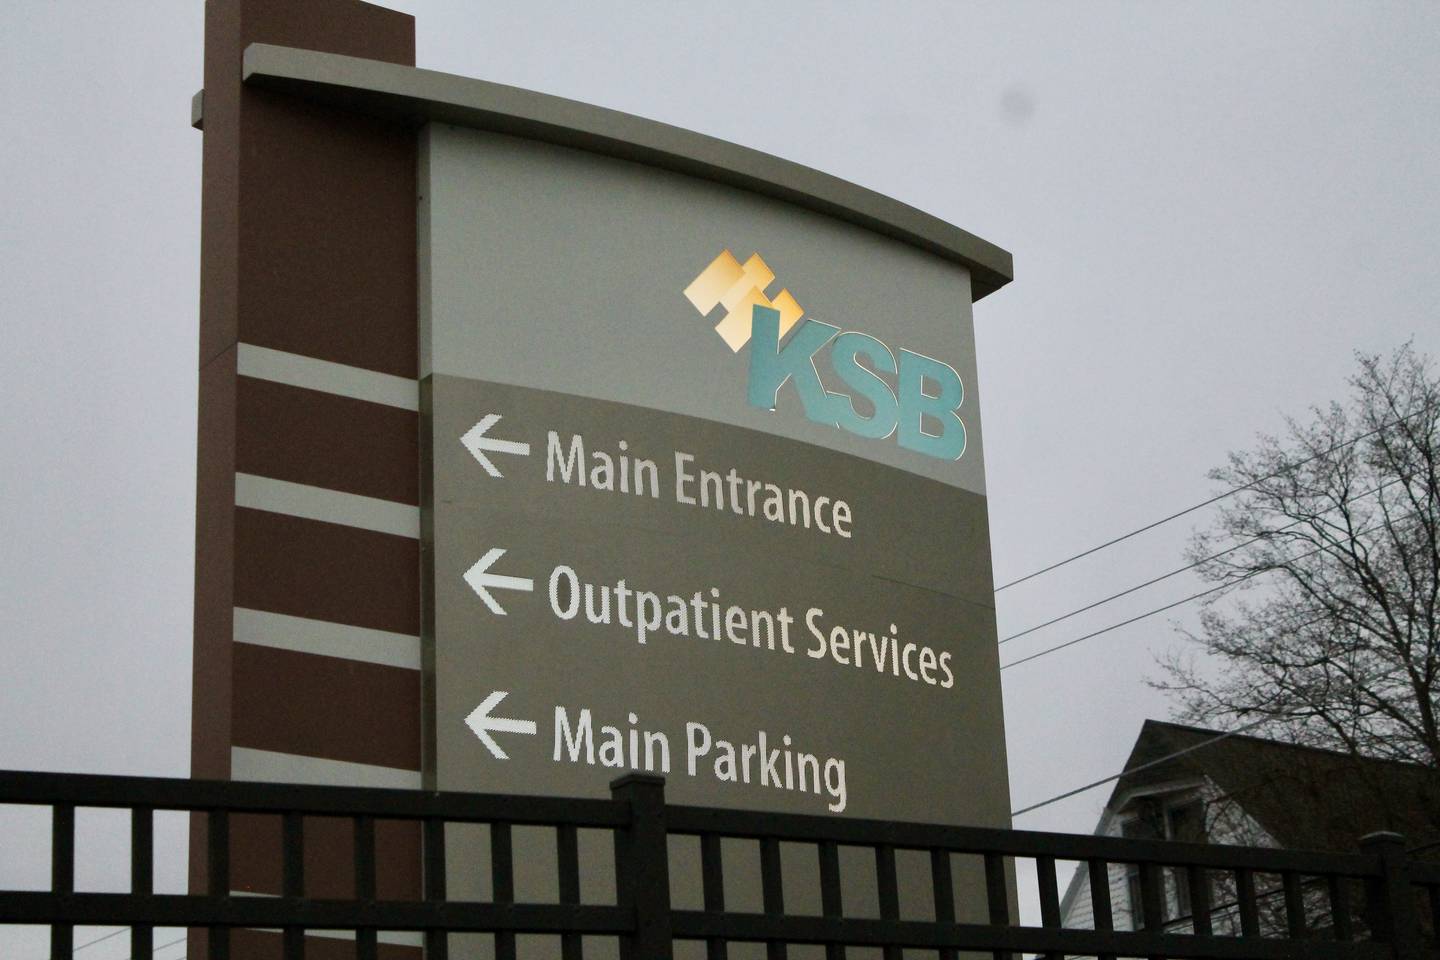 Parking entrance sign to KSB Hospital in Dixon from Tuesday, April 4, 2023.